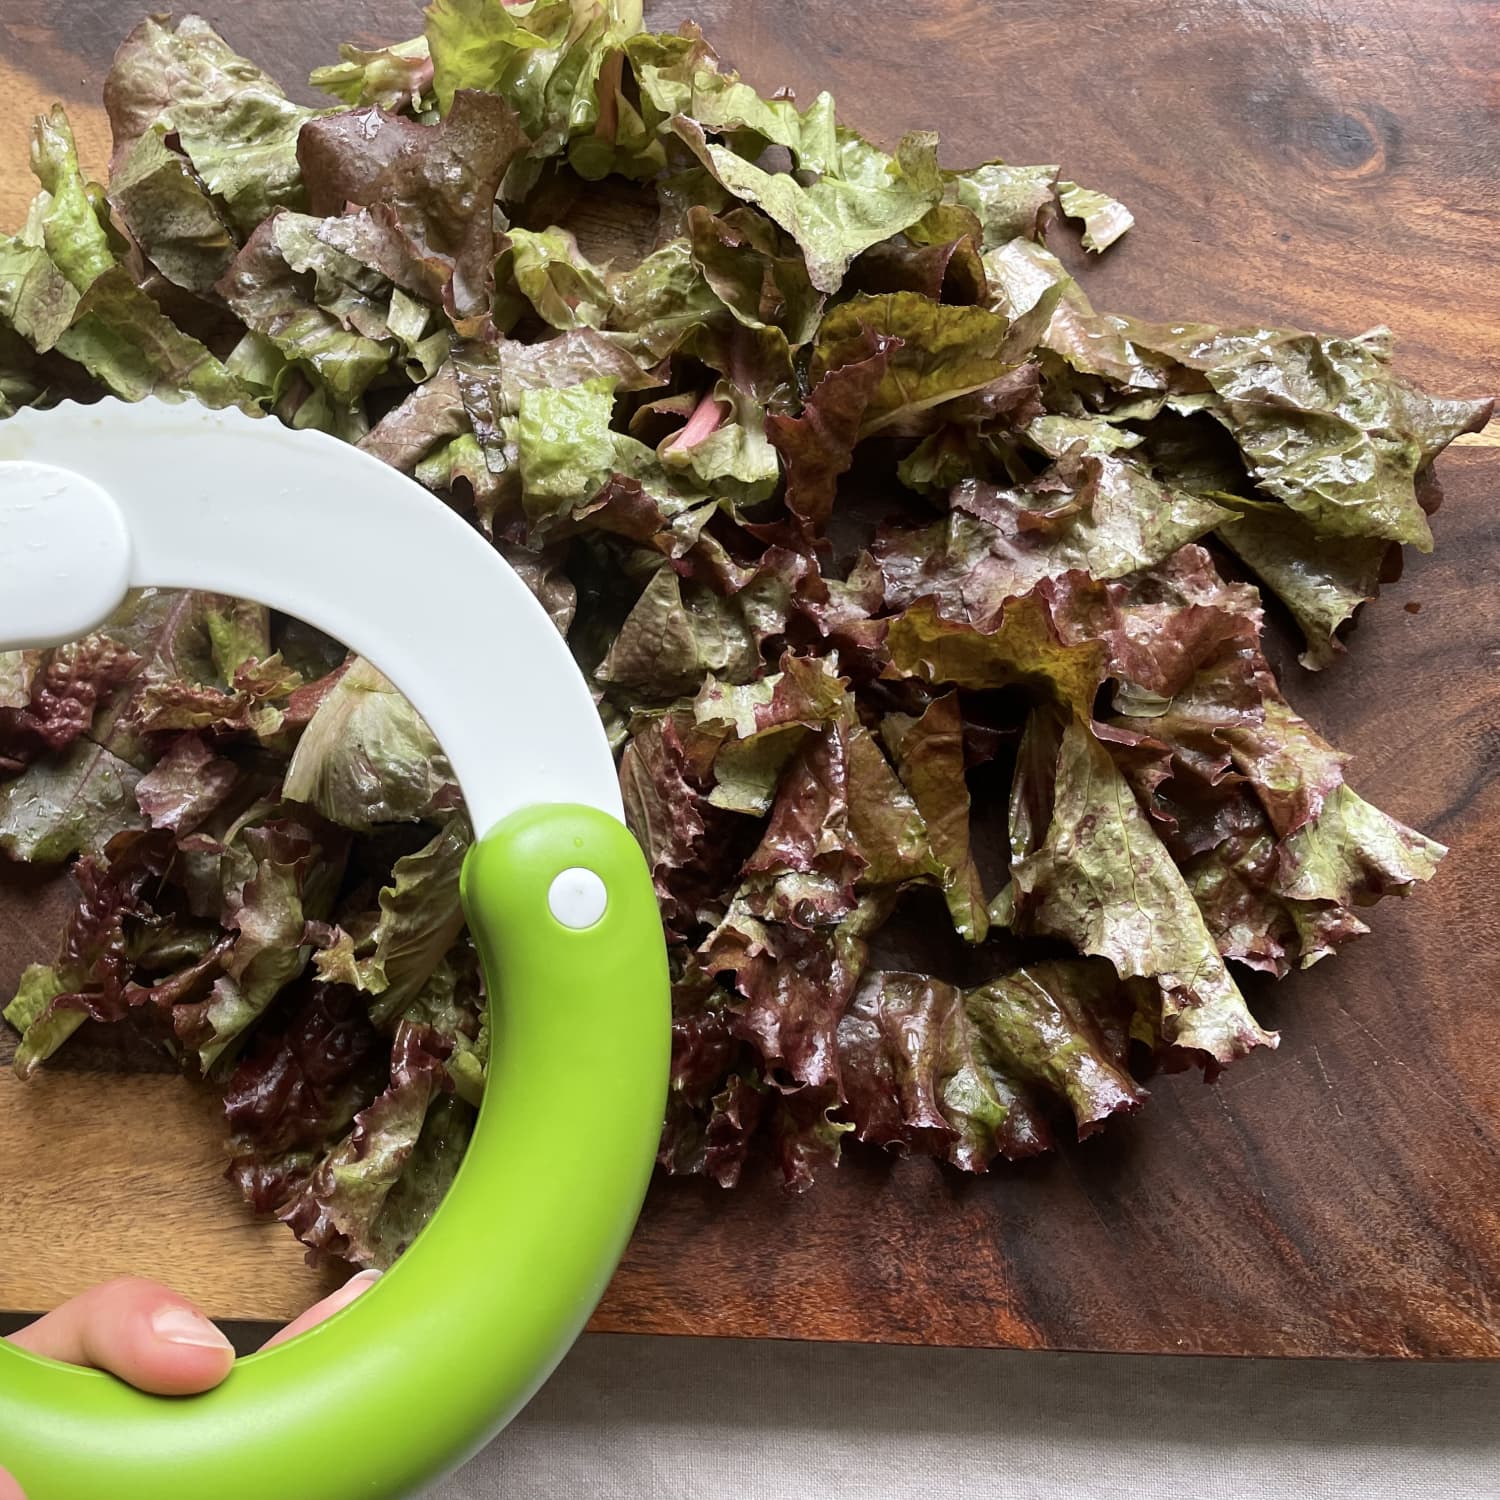 This $10 Salad Chopper Is Constantly Selling Out — Here's My